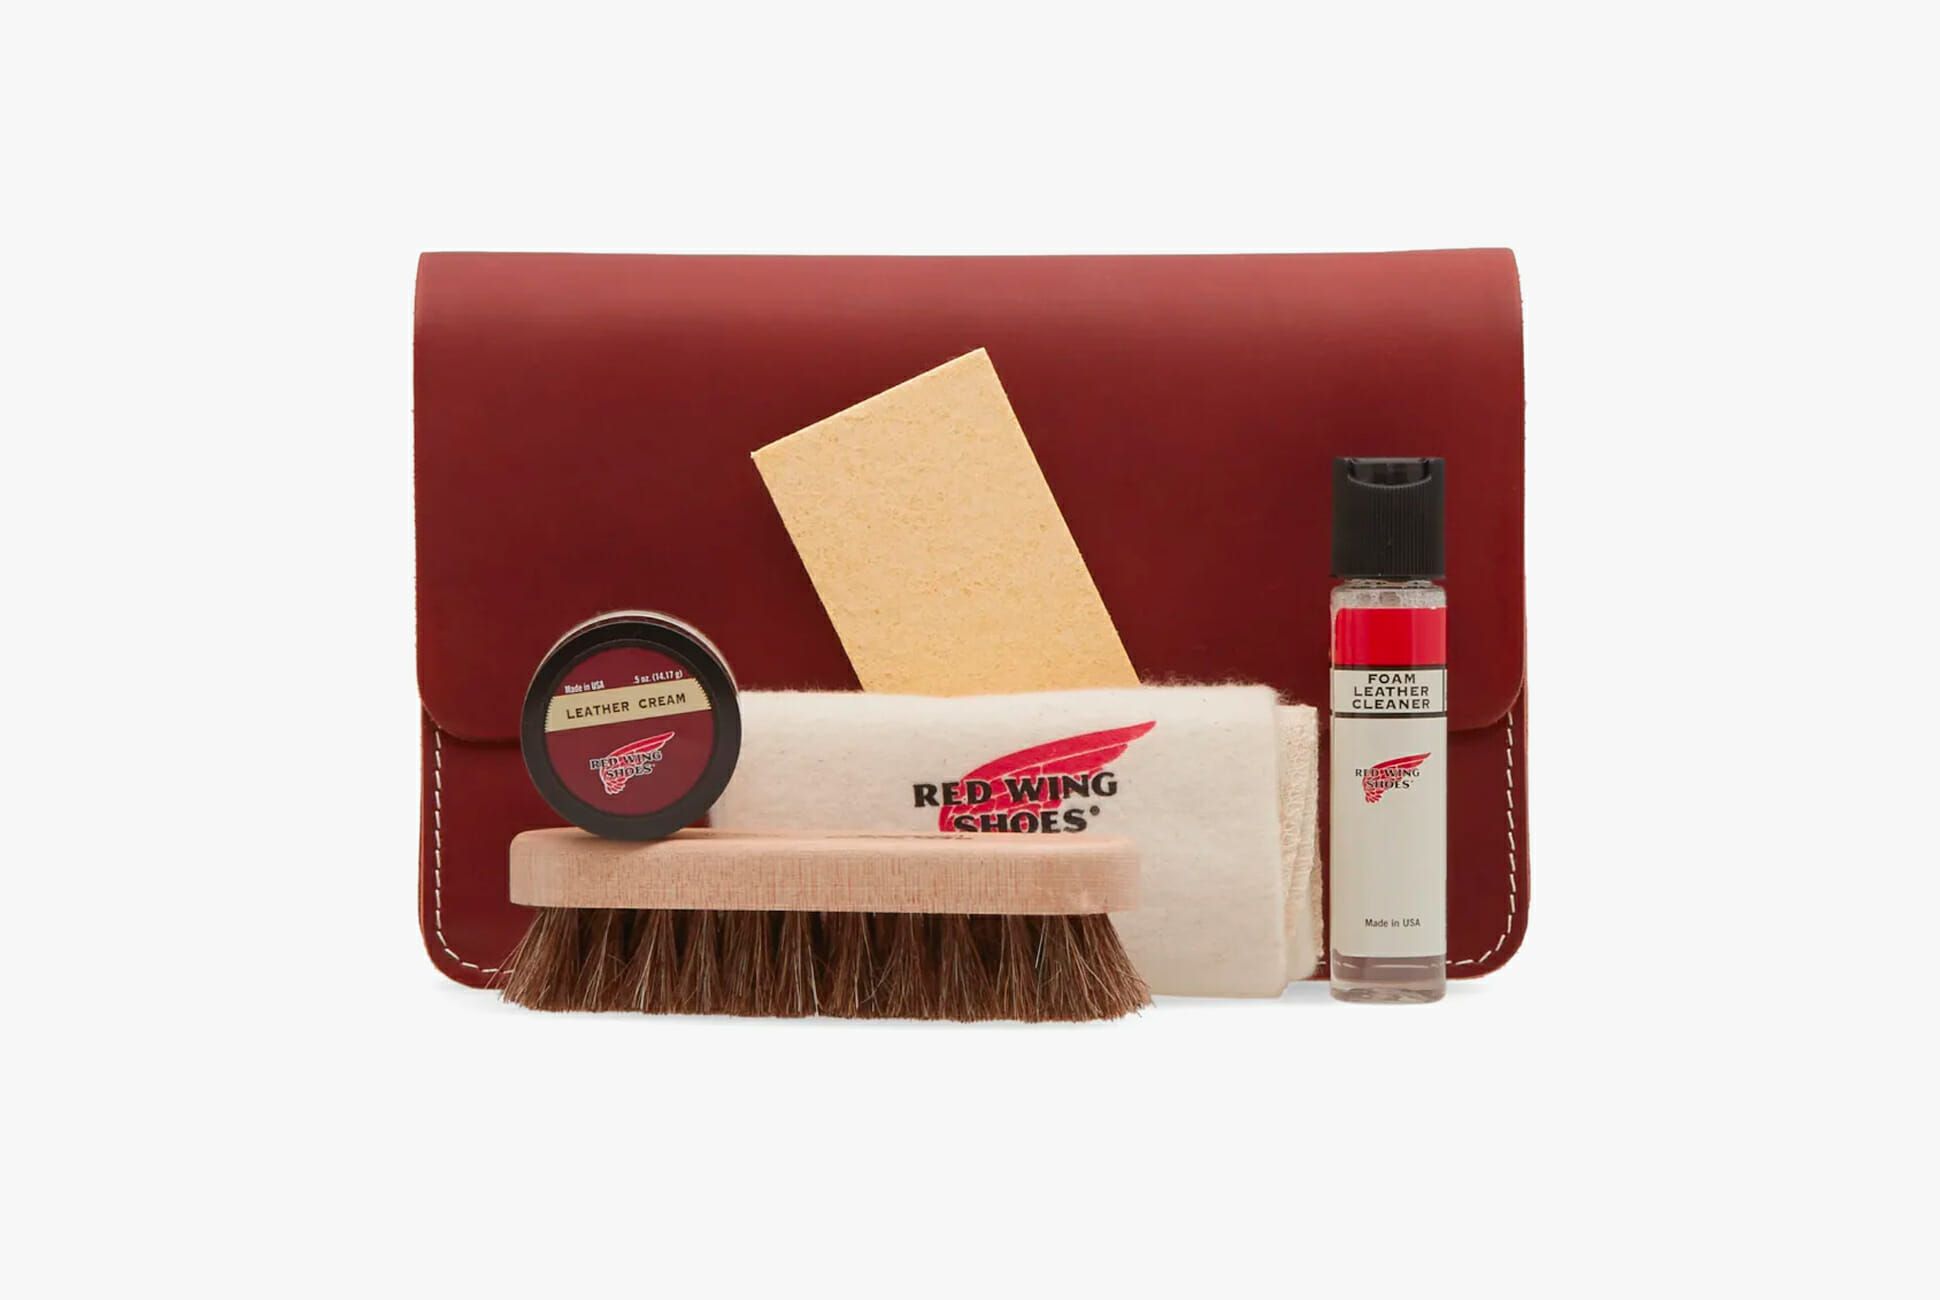 This Boot-Saving Leather Care Kit from 